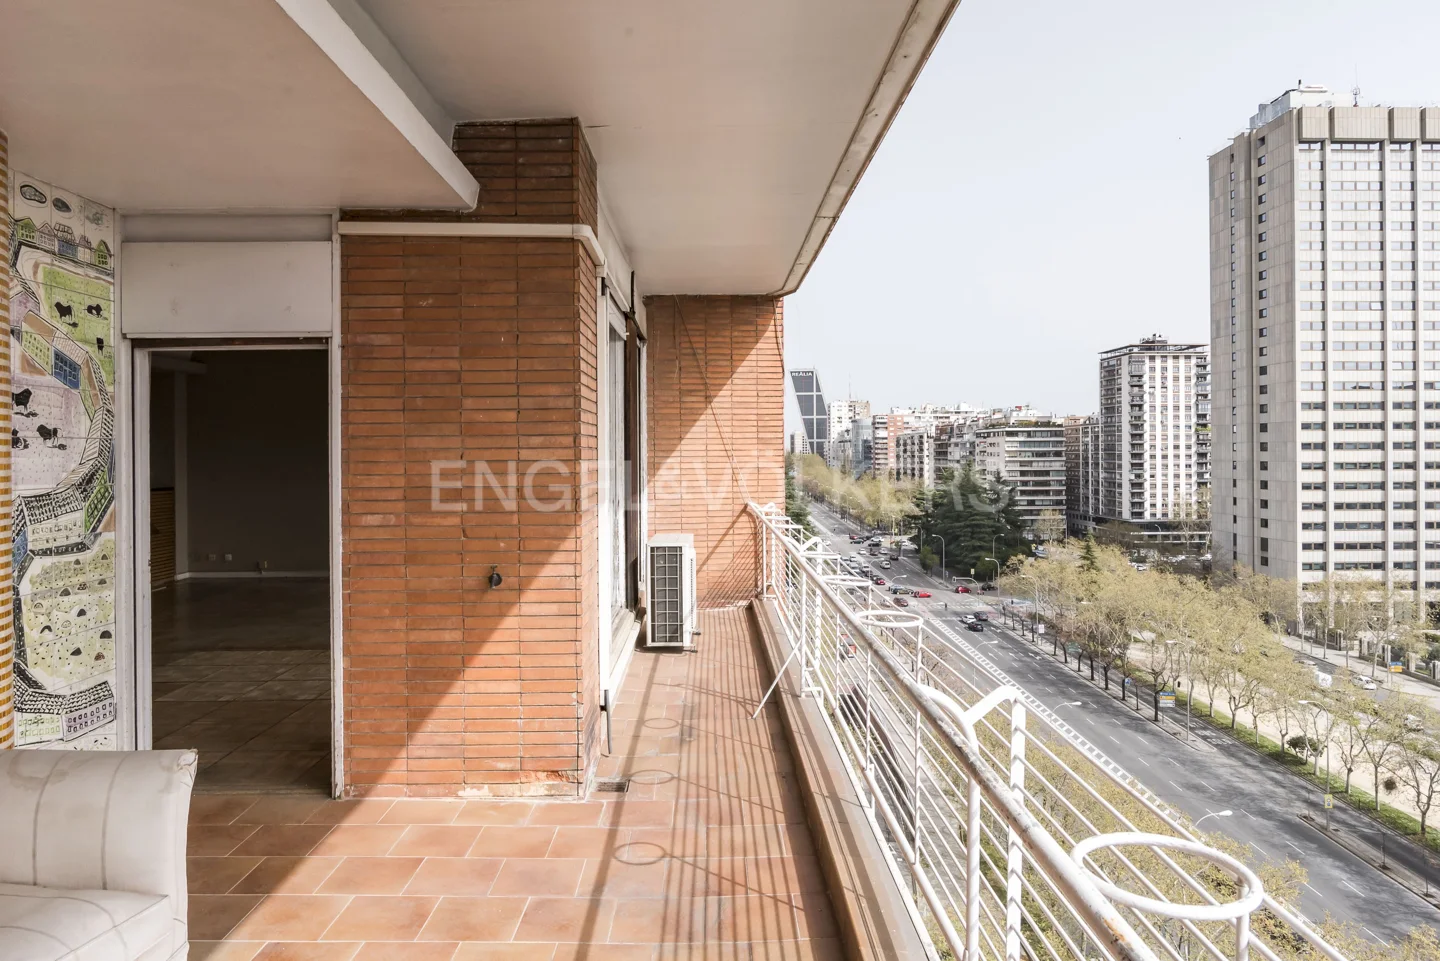 Great apartment in Castellana to reform with unobstructed views